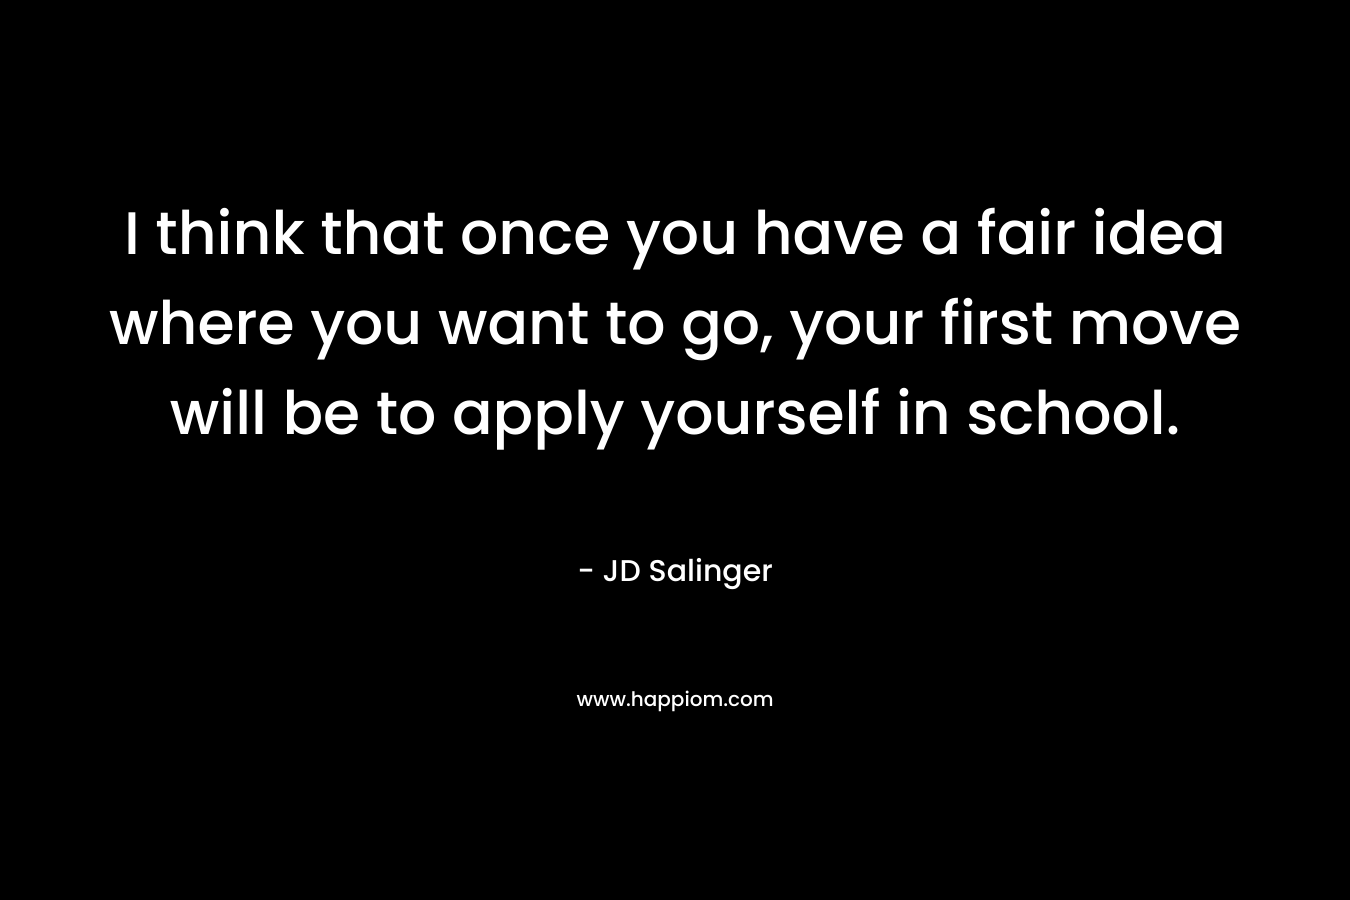 I think that once you have a fair idea where you want to go, your first move will be to apply yourself in school.